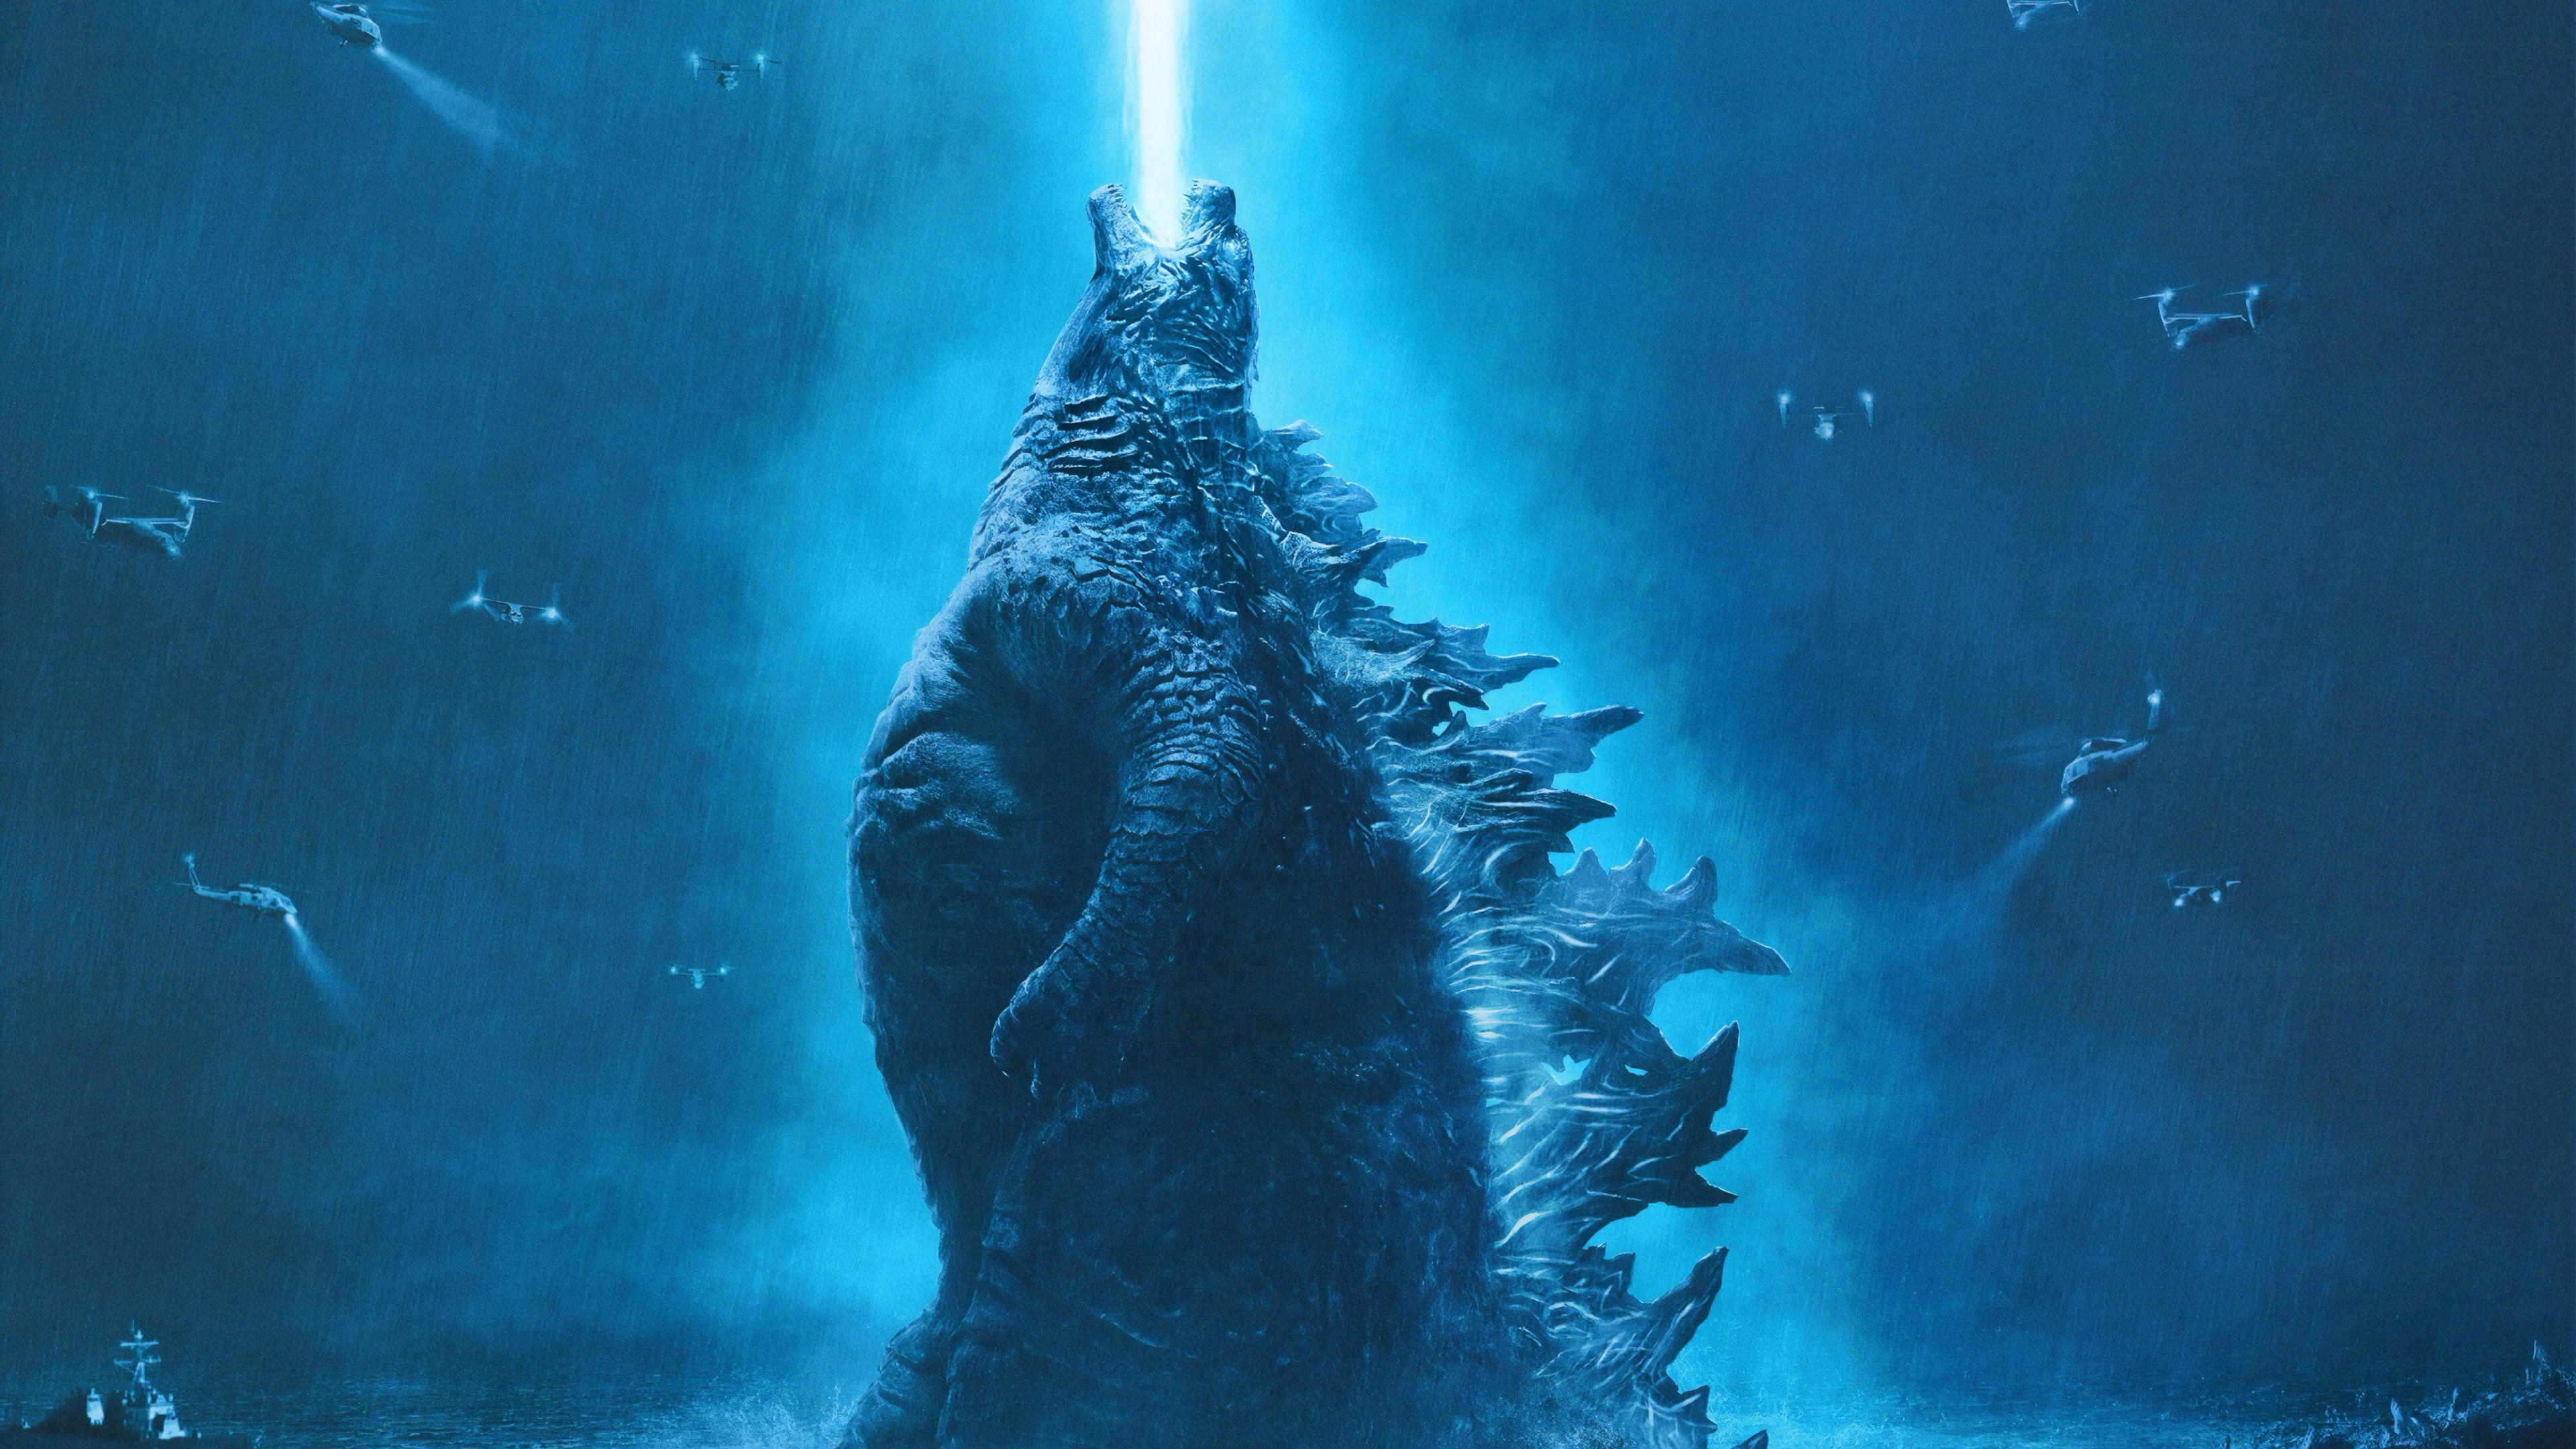 Godzilla 4K wallpaper for your desktop or mobile screen free and easy to download